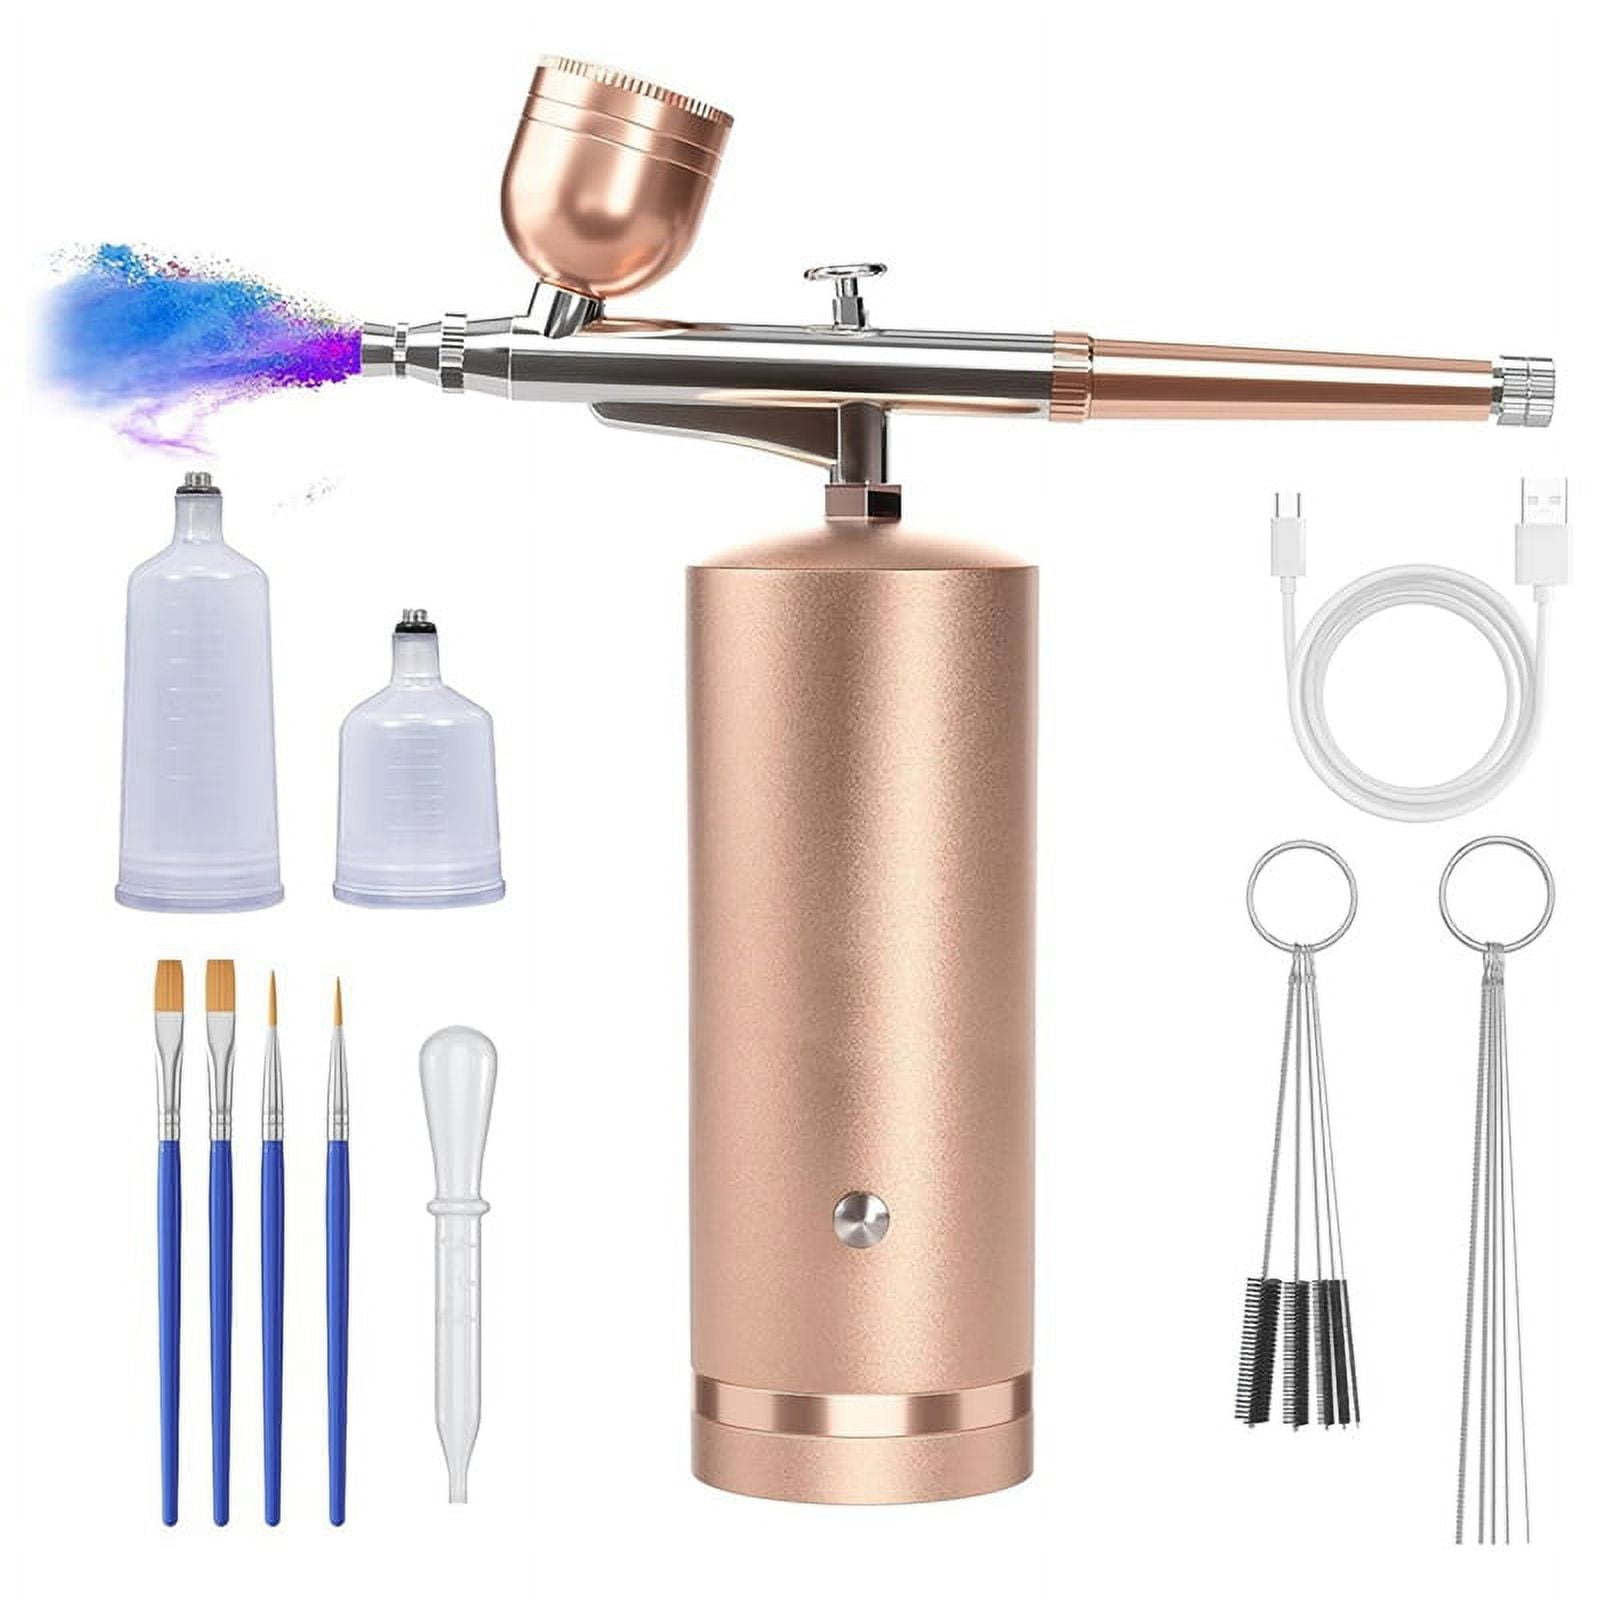  Airbrush Nail Art Kit with Compressor Portable Auto Handheld  Gun 0.3mm Tip, 27Psi air Pressure, Rechargeable Compressor, for Painting,  Tattoo, Nail Art, Model Coloring, Makeup and Cake Decorating : Arts, Crafts